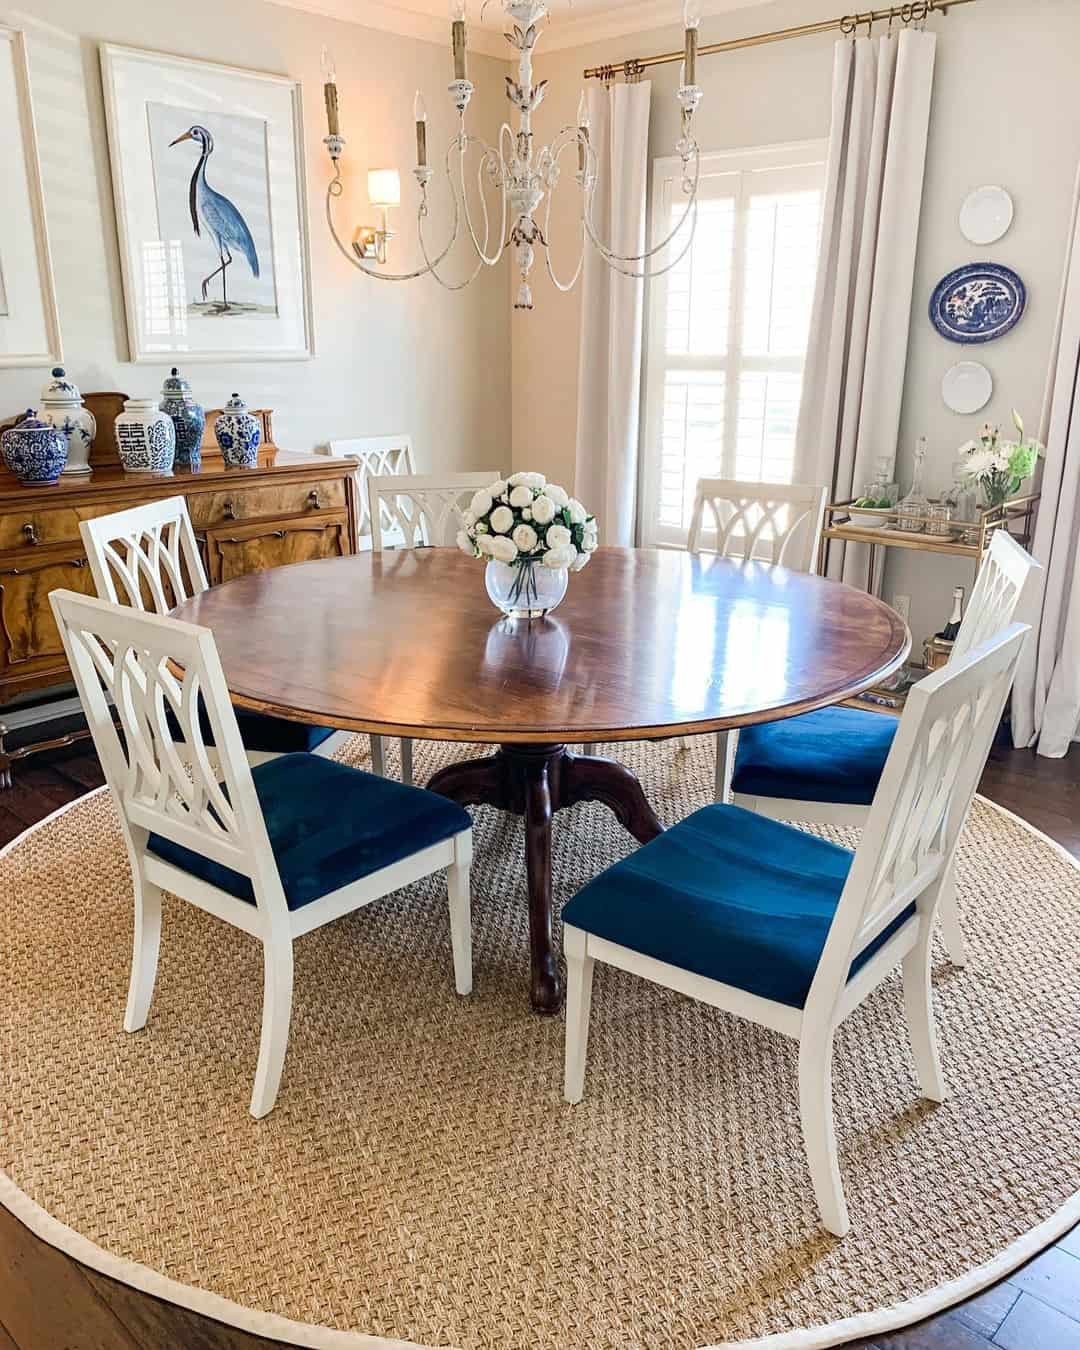 Grand Millennial-style Dining Room With Blue Accents - Soul & Lane